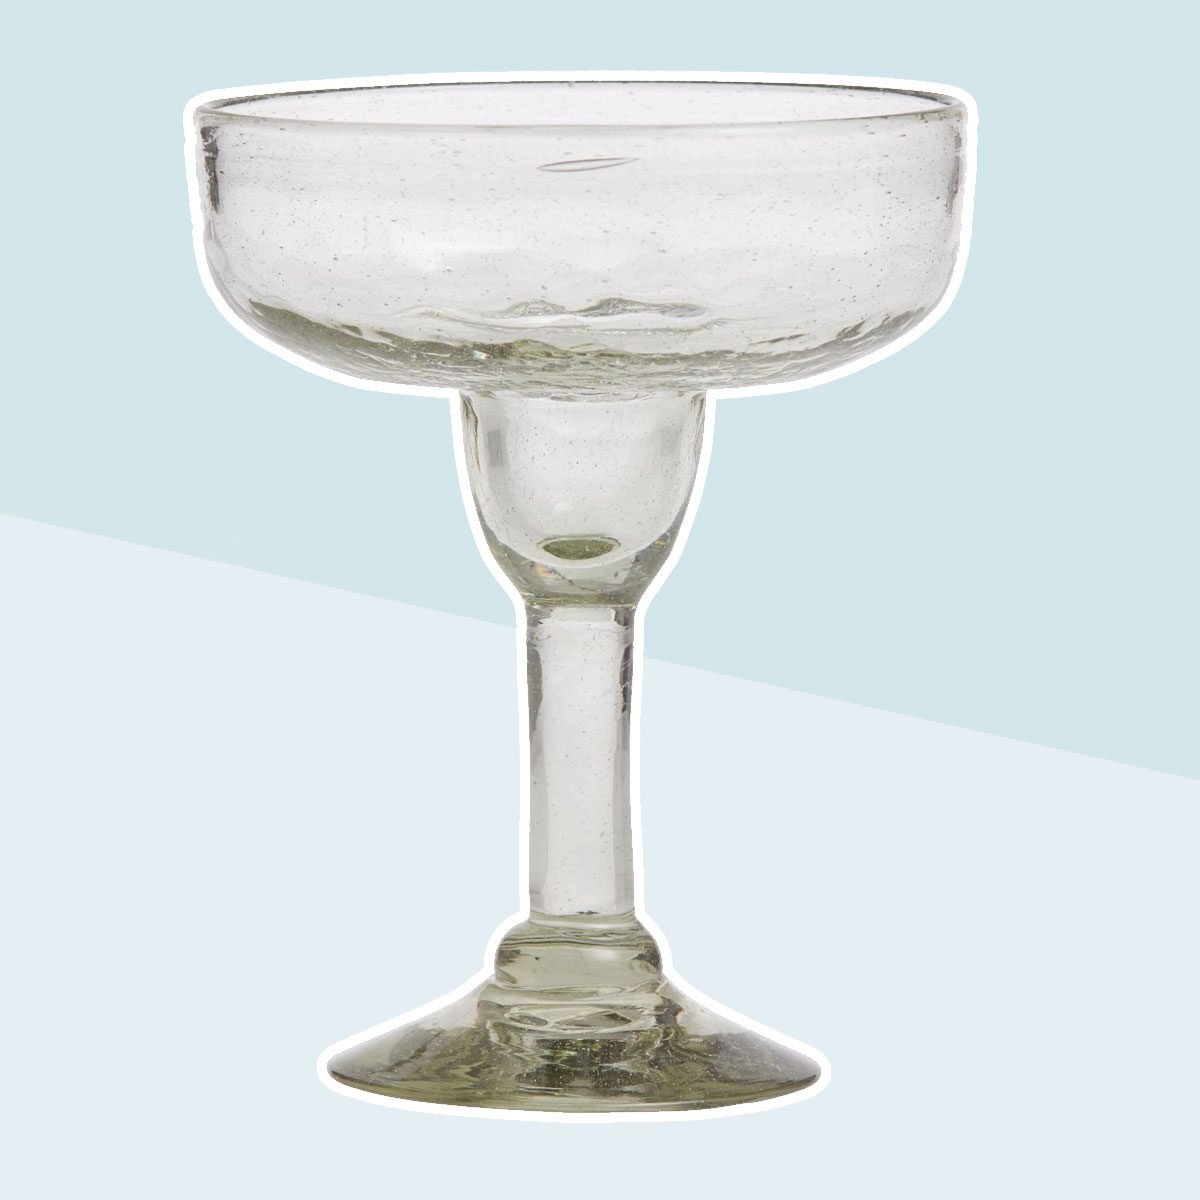 The Best Margarita Glasses You Need In Your Home Bar In 2022 7139